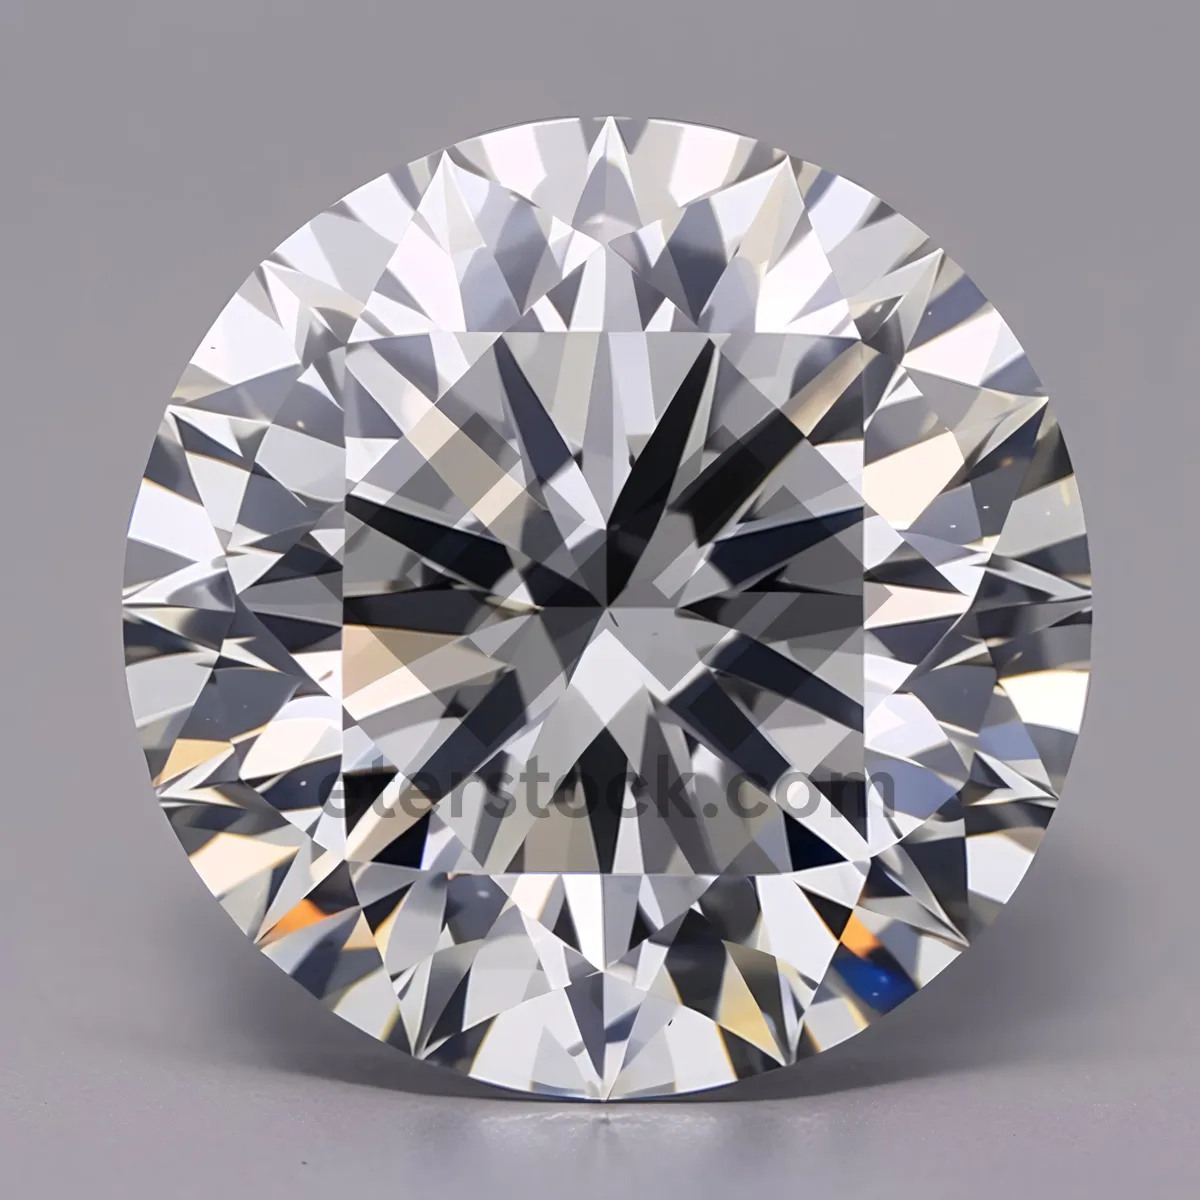 Picture of Sparkling Gemstone: A Brilliant, Crystal-Clear Diamond